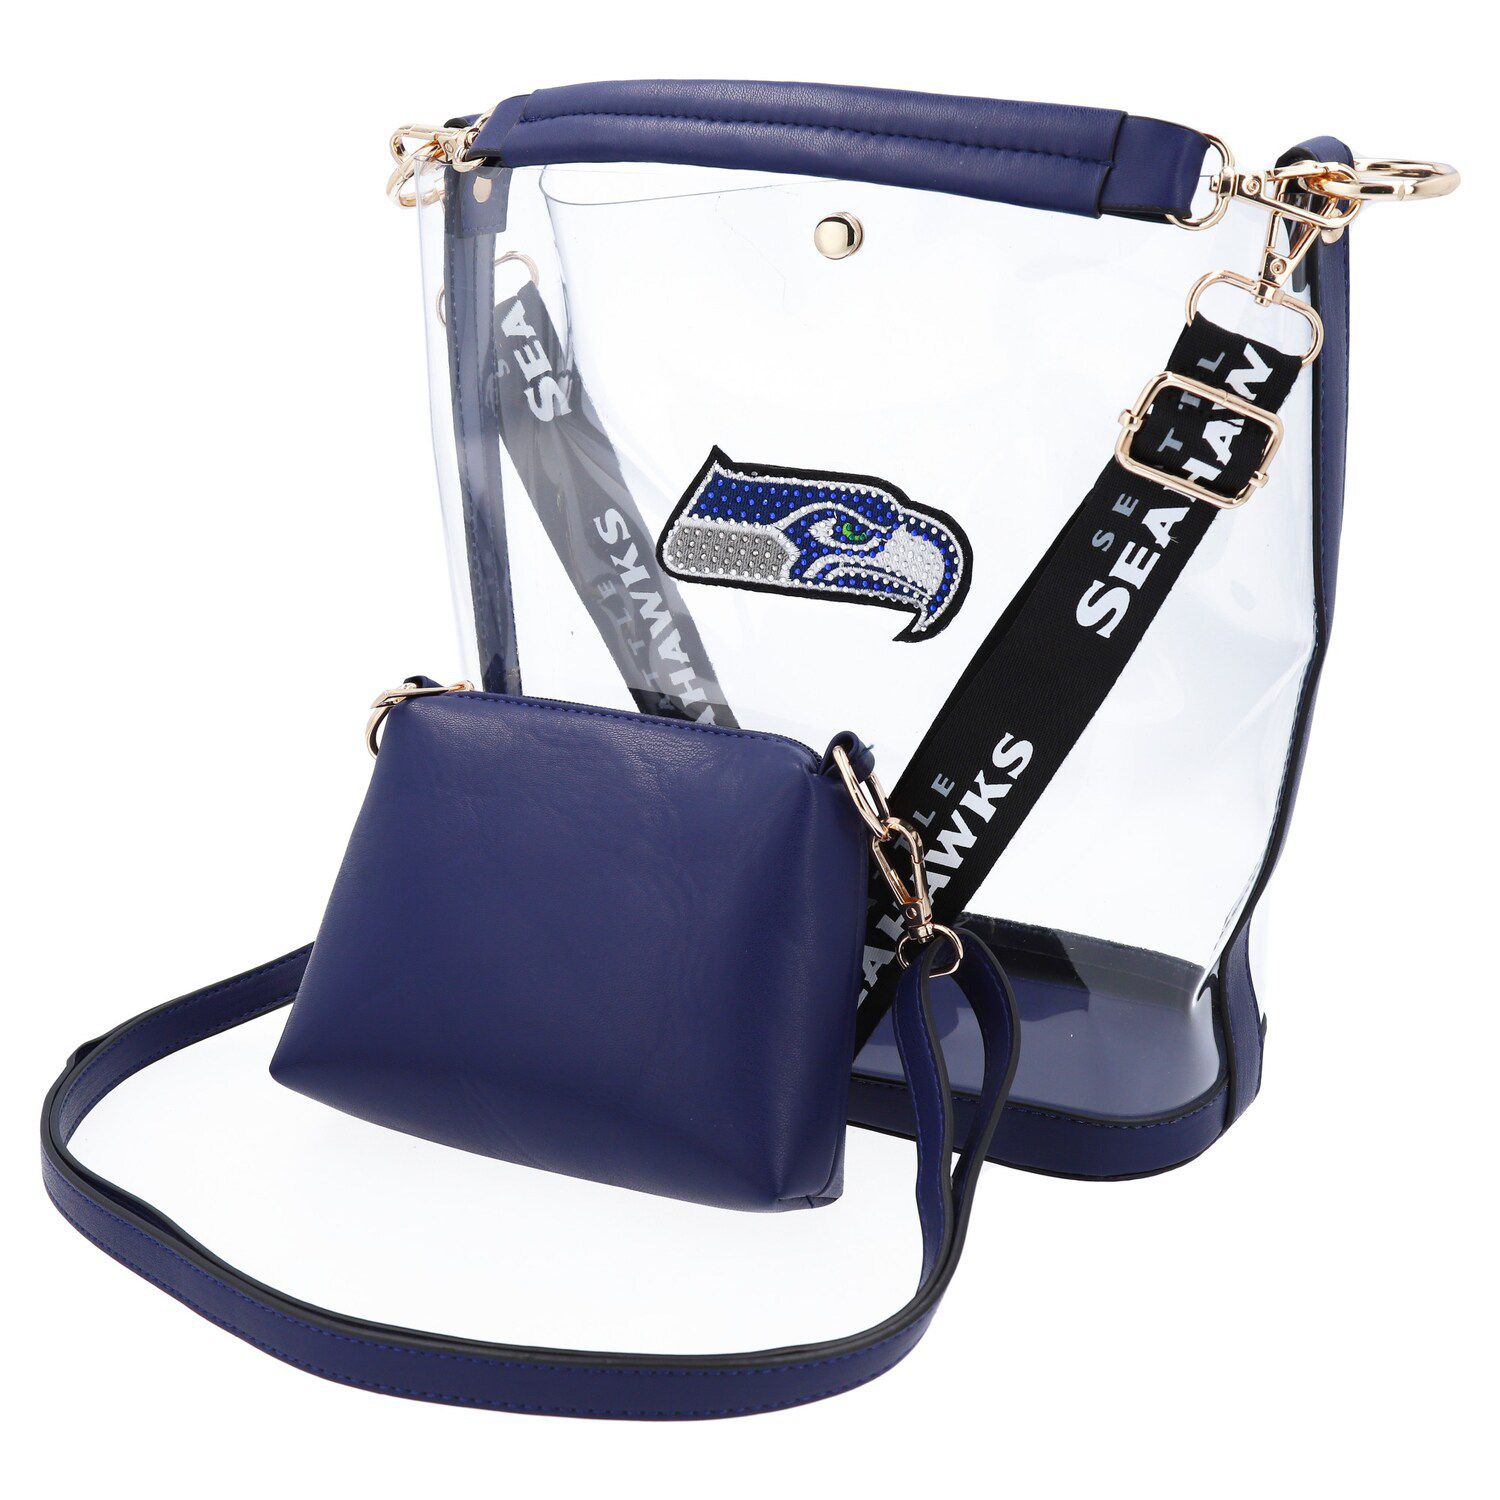 Refried Apparel Seattle Seahawks Sustainable Upcycled Zipper Pouch